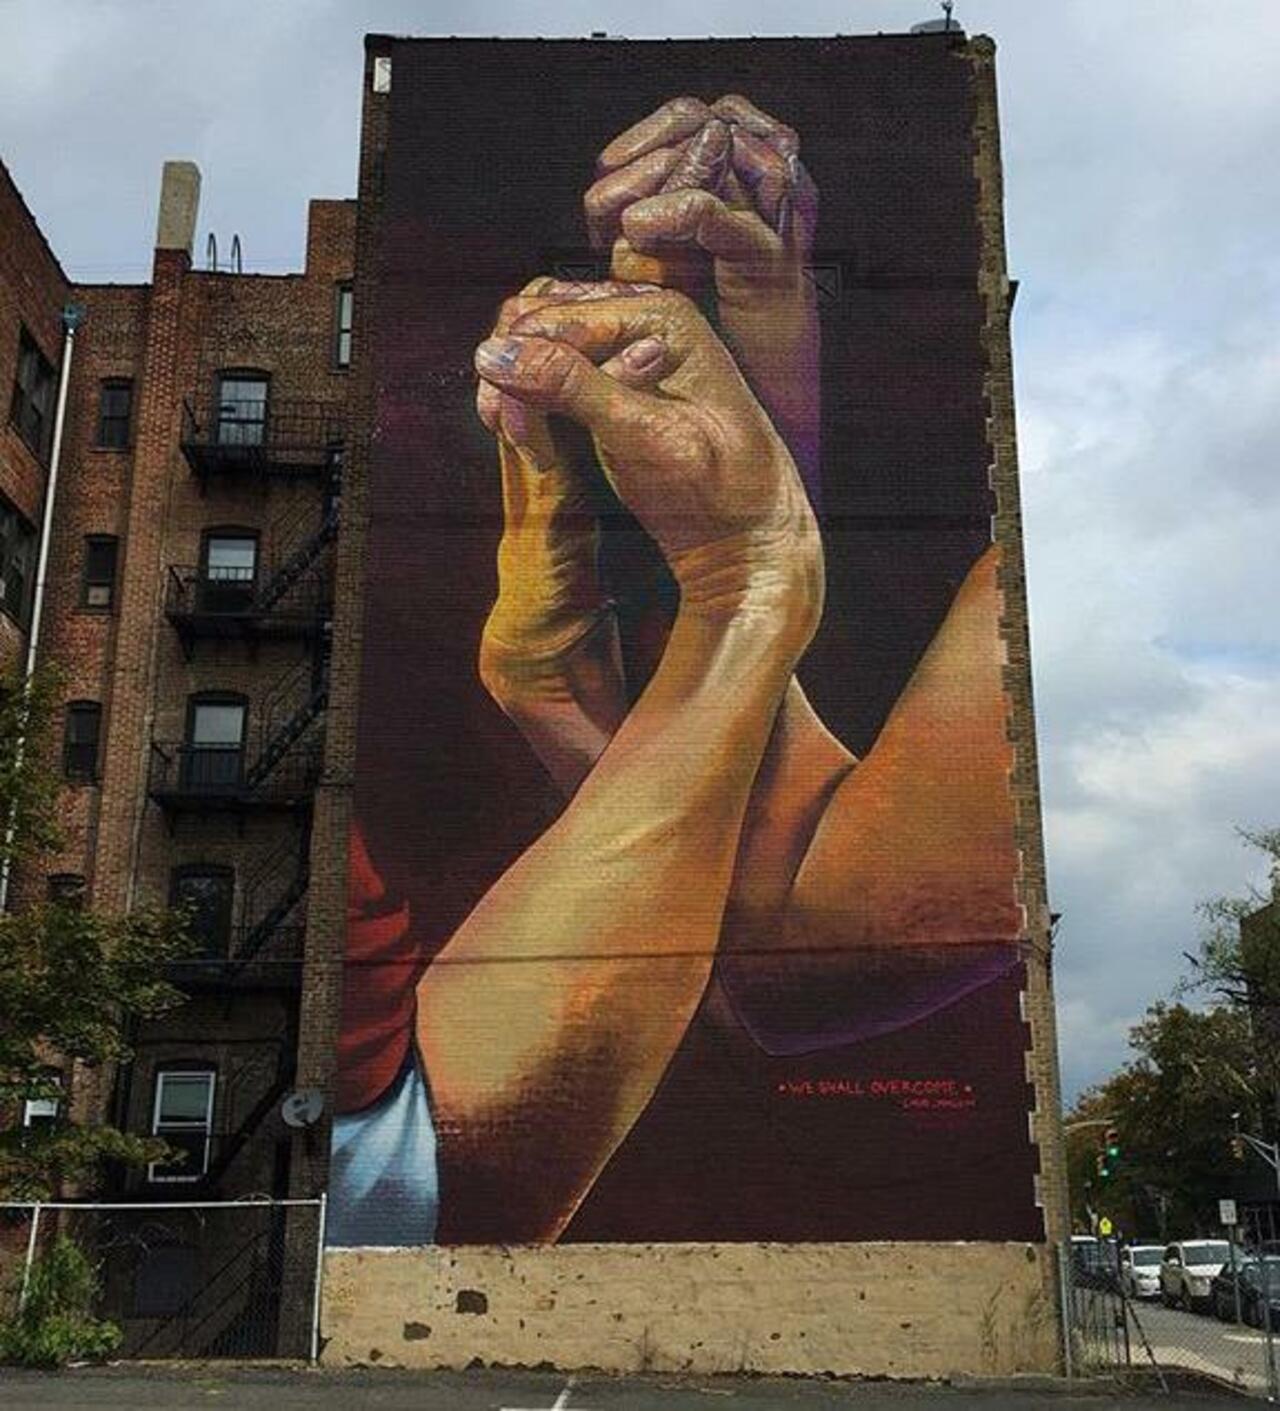 New Street Art by CaseMaclaim in Jersey City for the TheBKcollective 

#art #graffiti #mural #streetart http://t.co/OlbyPOtRAb